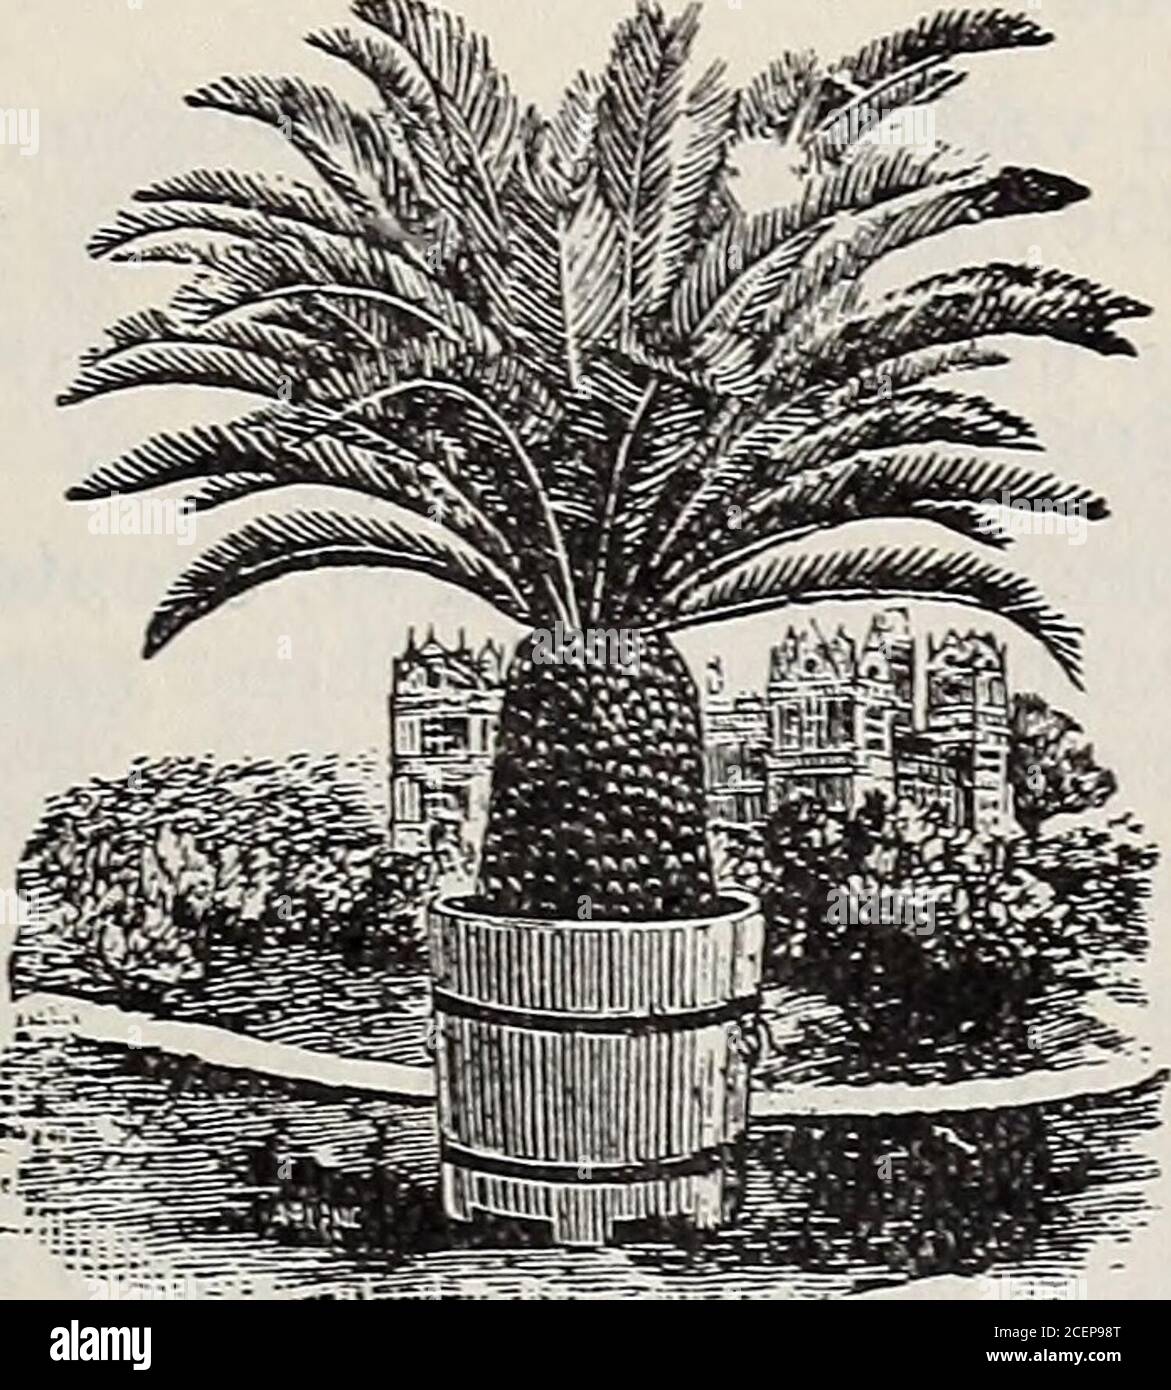 . 18th annual catalogue of the Germain Seed and Plant Co. = v:,-jV -.&gt;j£*. •&gt;-.•:„-; ■ Boston Fern. Japanese Fern Ball. NOS. 326-330 S. MAIN ST., LOS ANGELES. 87 PALMS. This family are fitly called Princes of the Vegetable Kingdom. Their beautiful characteristics, grand-eur and graceful beauty places them at the head of decorative plants. For description of those varie-ties listed but not described here, see Palm seed list, pages 82-83. Chamaerops excelsa.—Hardy Fan Palm. In5-in. pots 50c; larger plants, according to size,up to $5.00. COCOS australis.— Brazilian Palm. In 6-in.pote, each Stock Photo